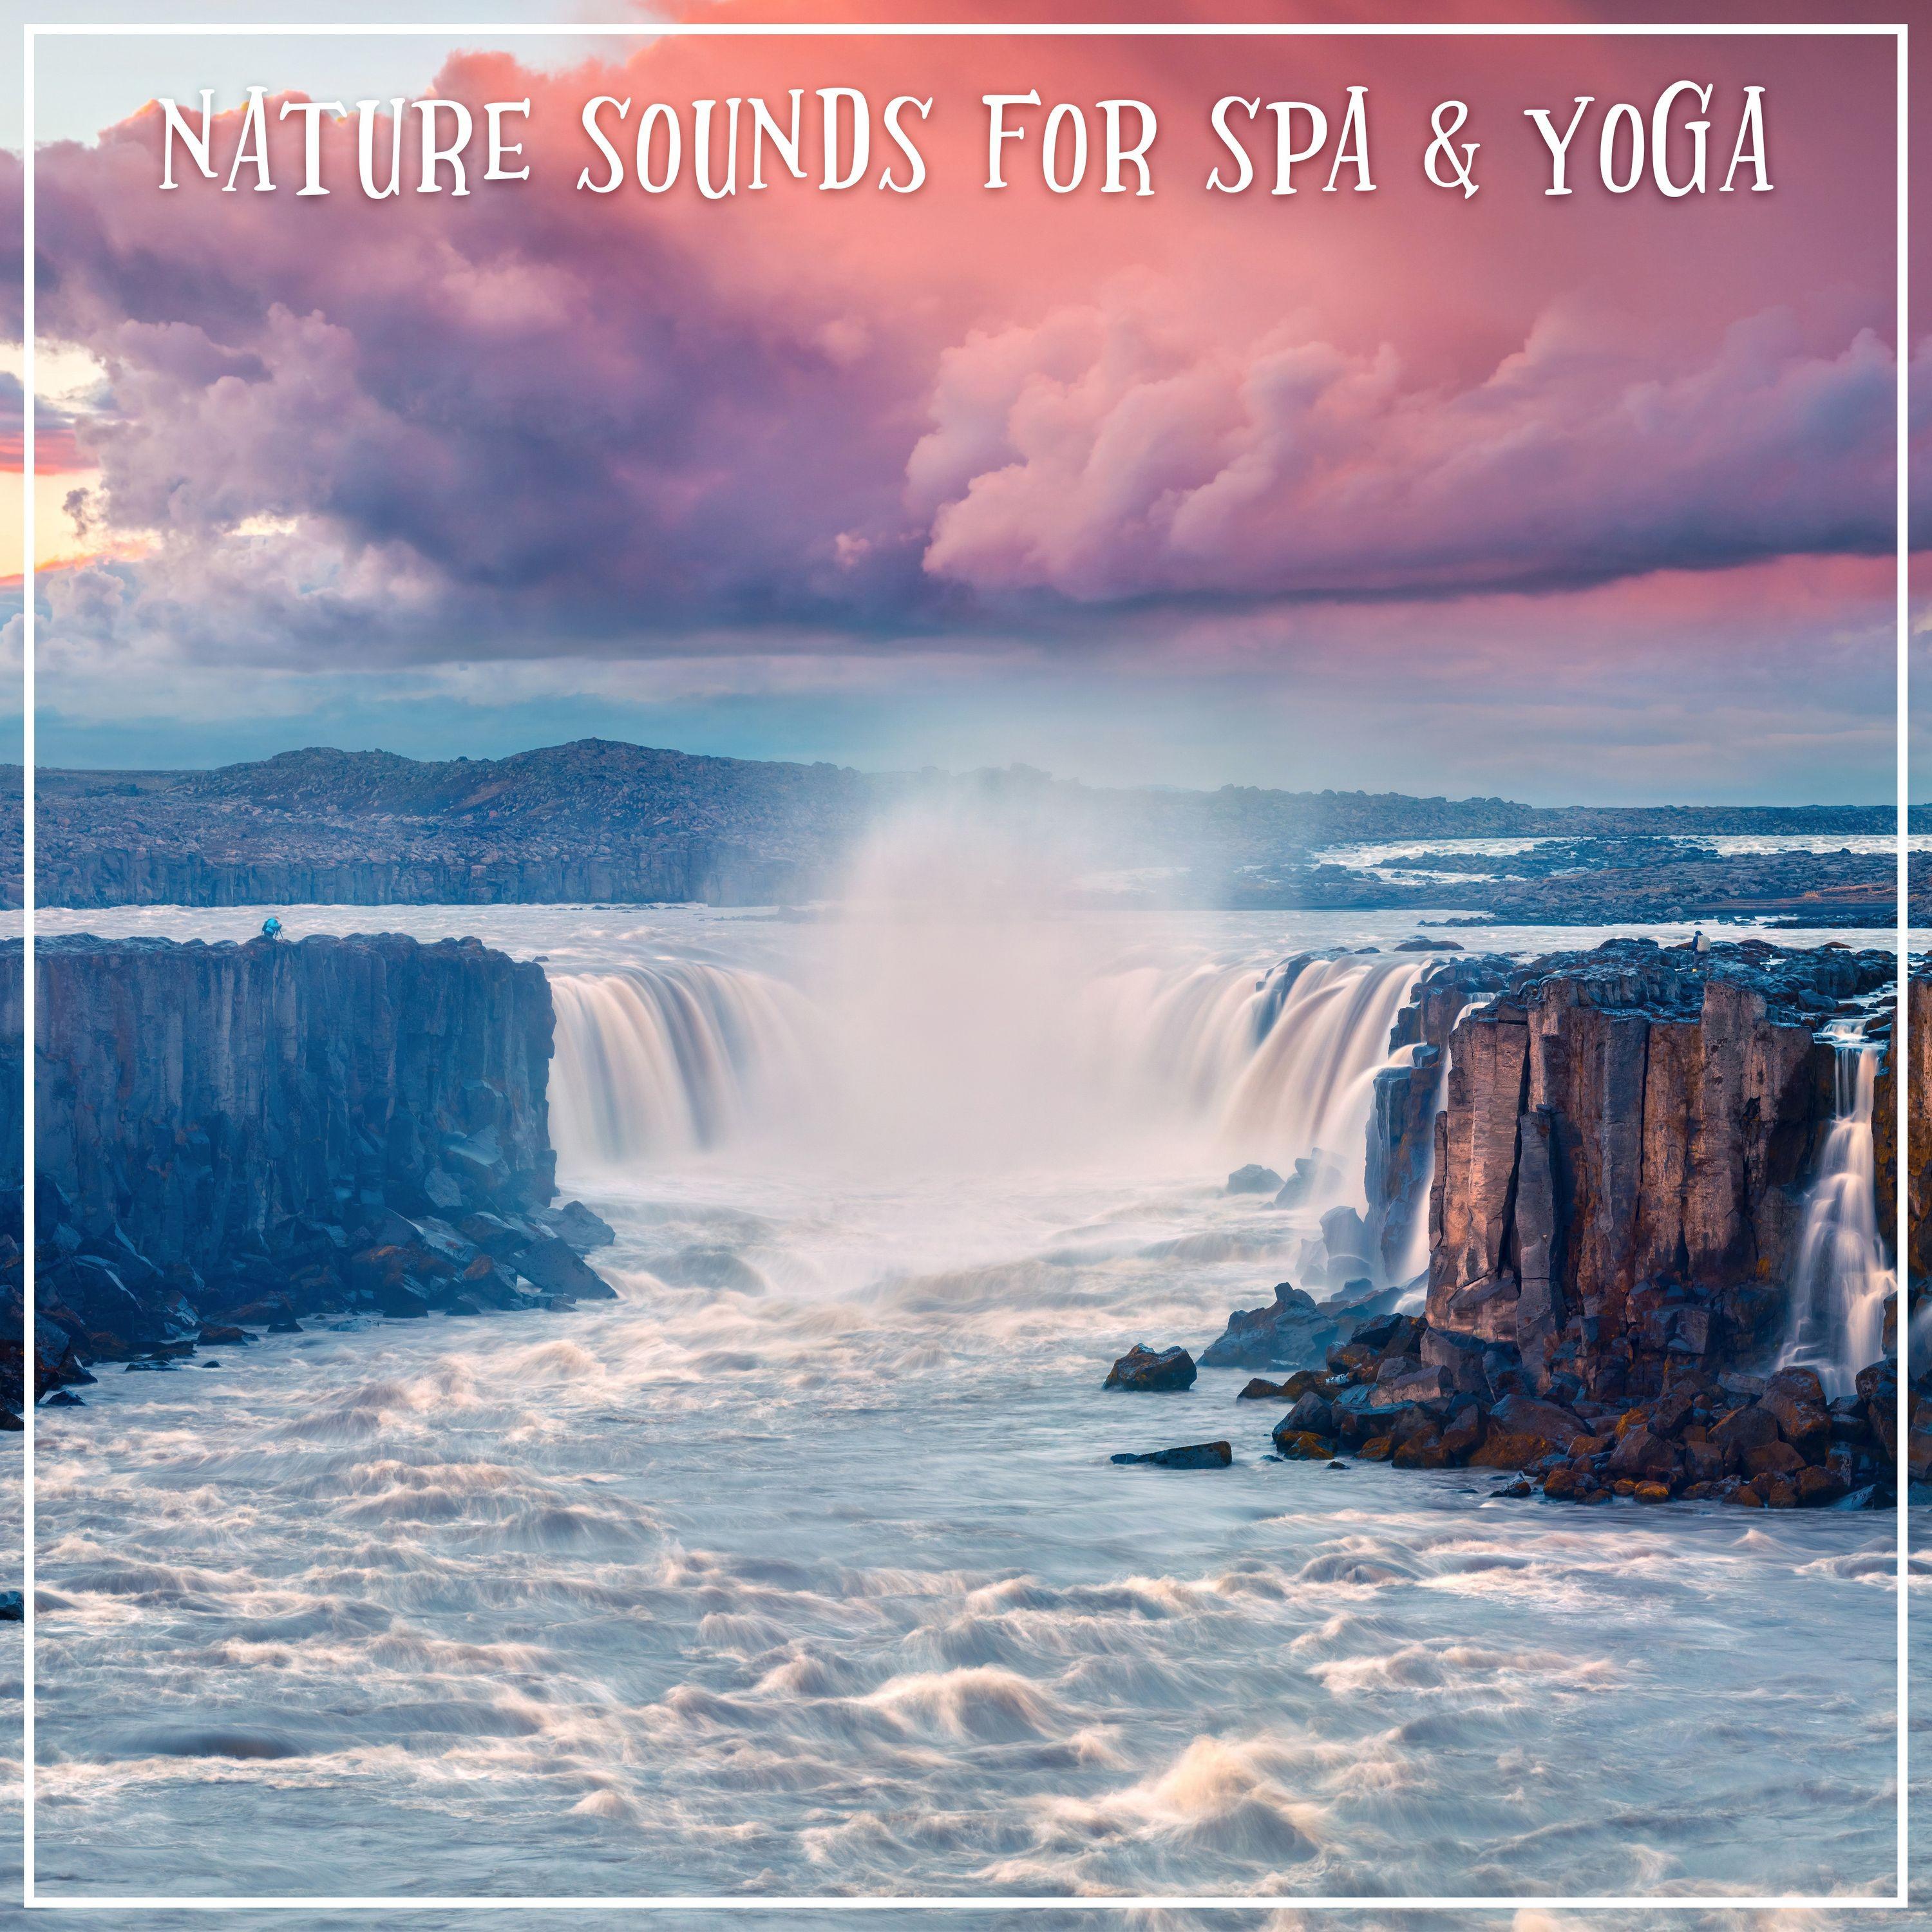 Nature Sounds for Spa & Yoga